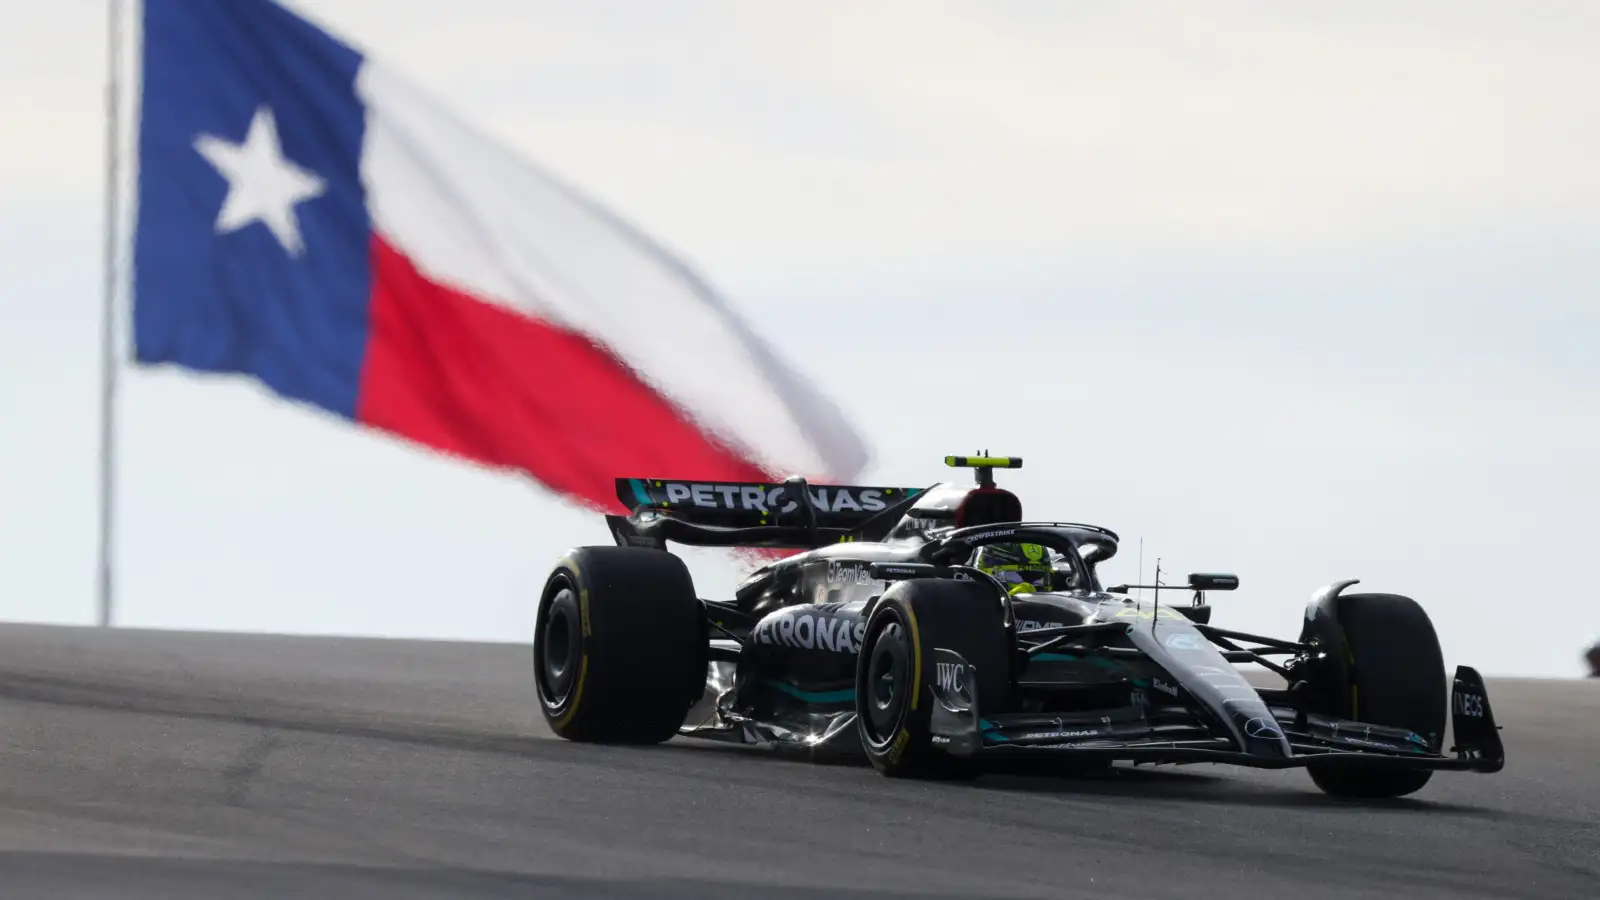 Lewis Hamilton racing for Mercedes in the United States Grand Prix.